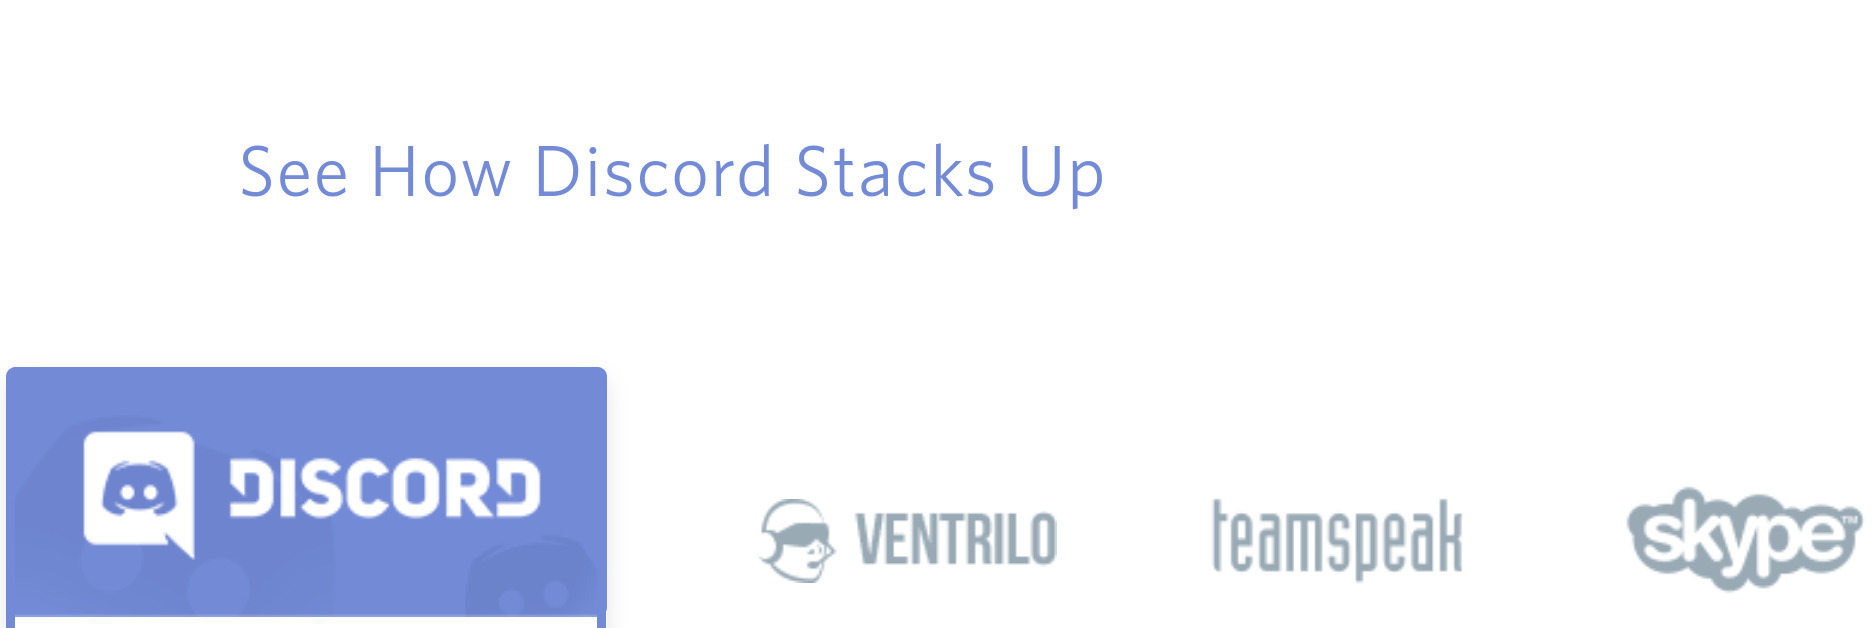 A table on the Discord landing page that shows how Discord “stacks up to the competition”. The competition in this table, from left to right, are: Ventrilo, teamspeak, and Skype.